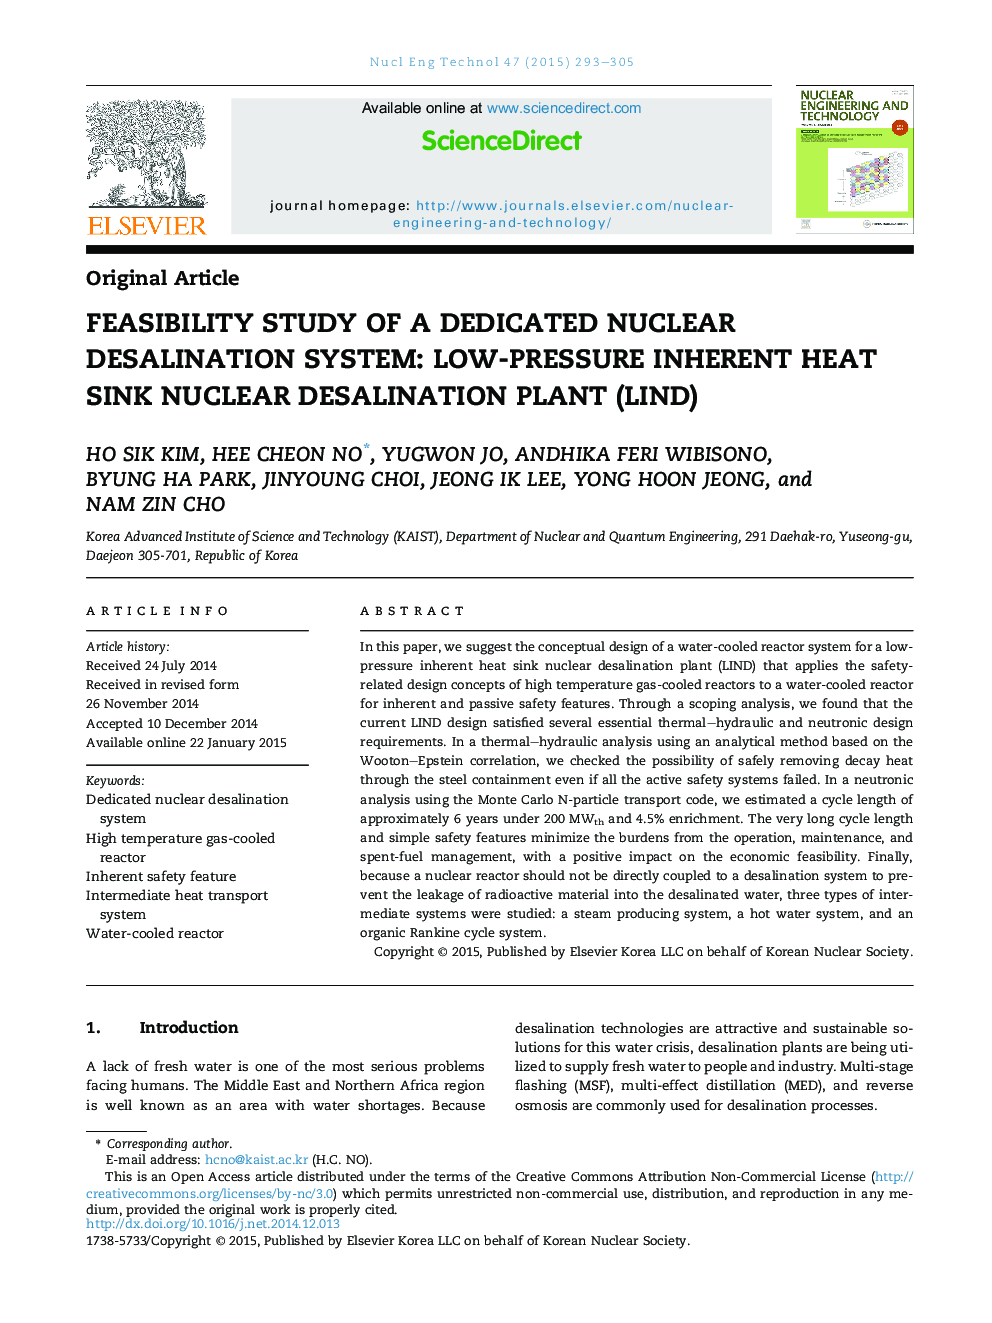 Feasibility study of a dedicated nuclear desalination system: Low-pressure Inherent heat sink Nuclear Desalination plant (LIND) 